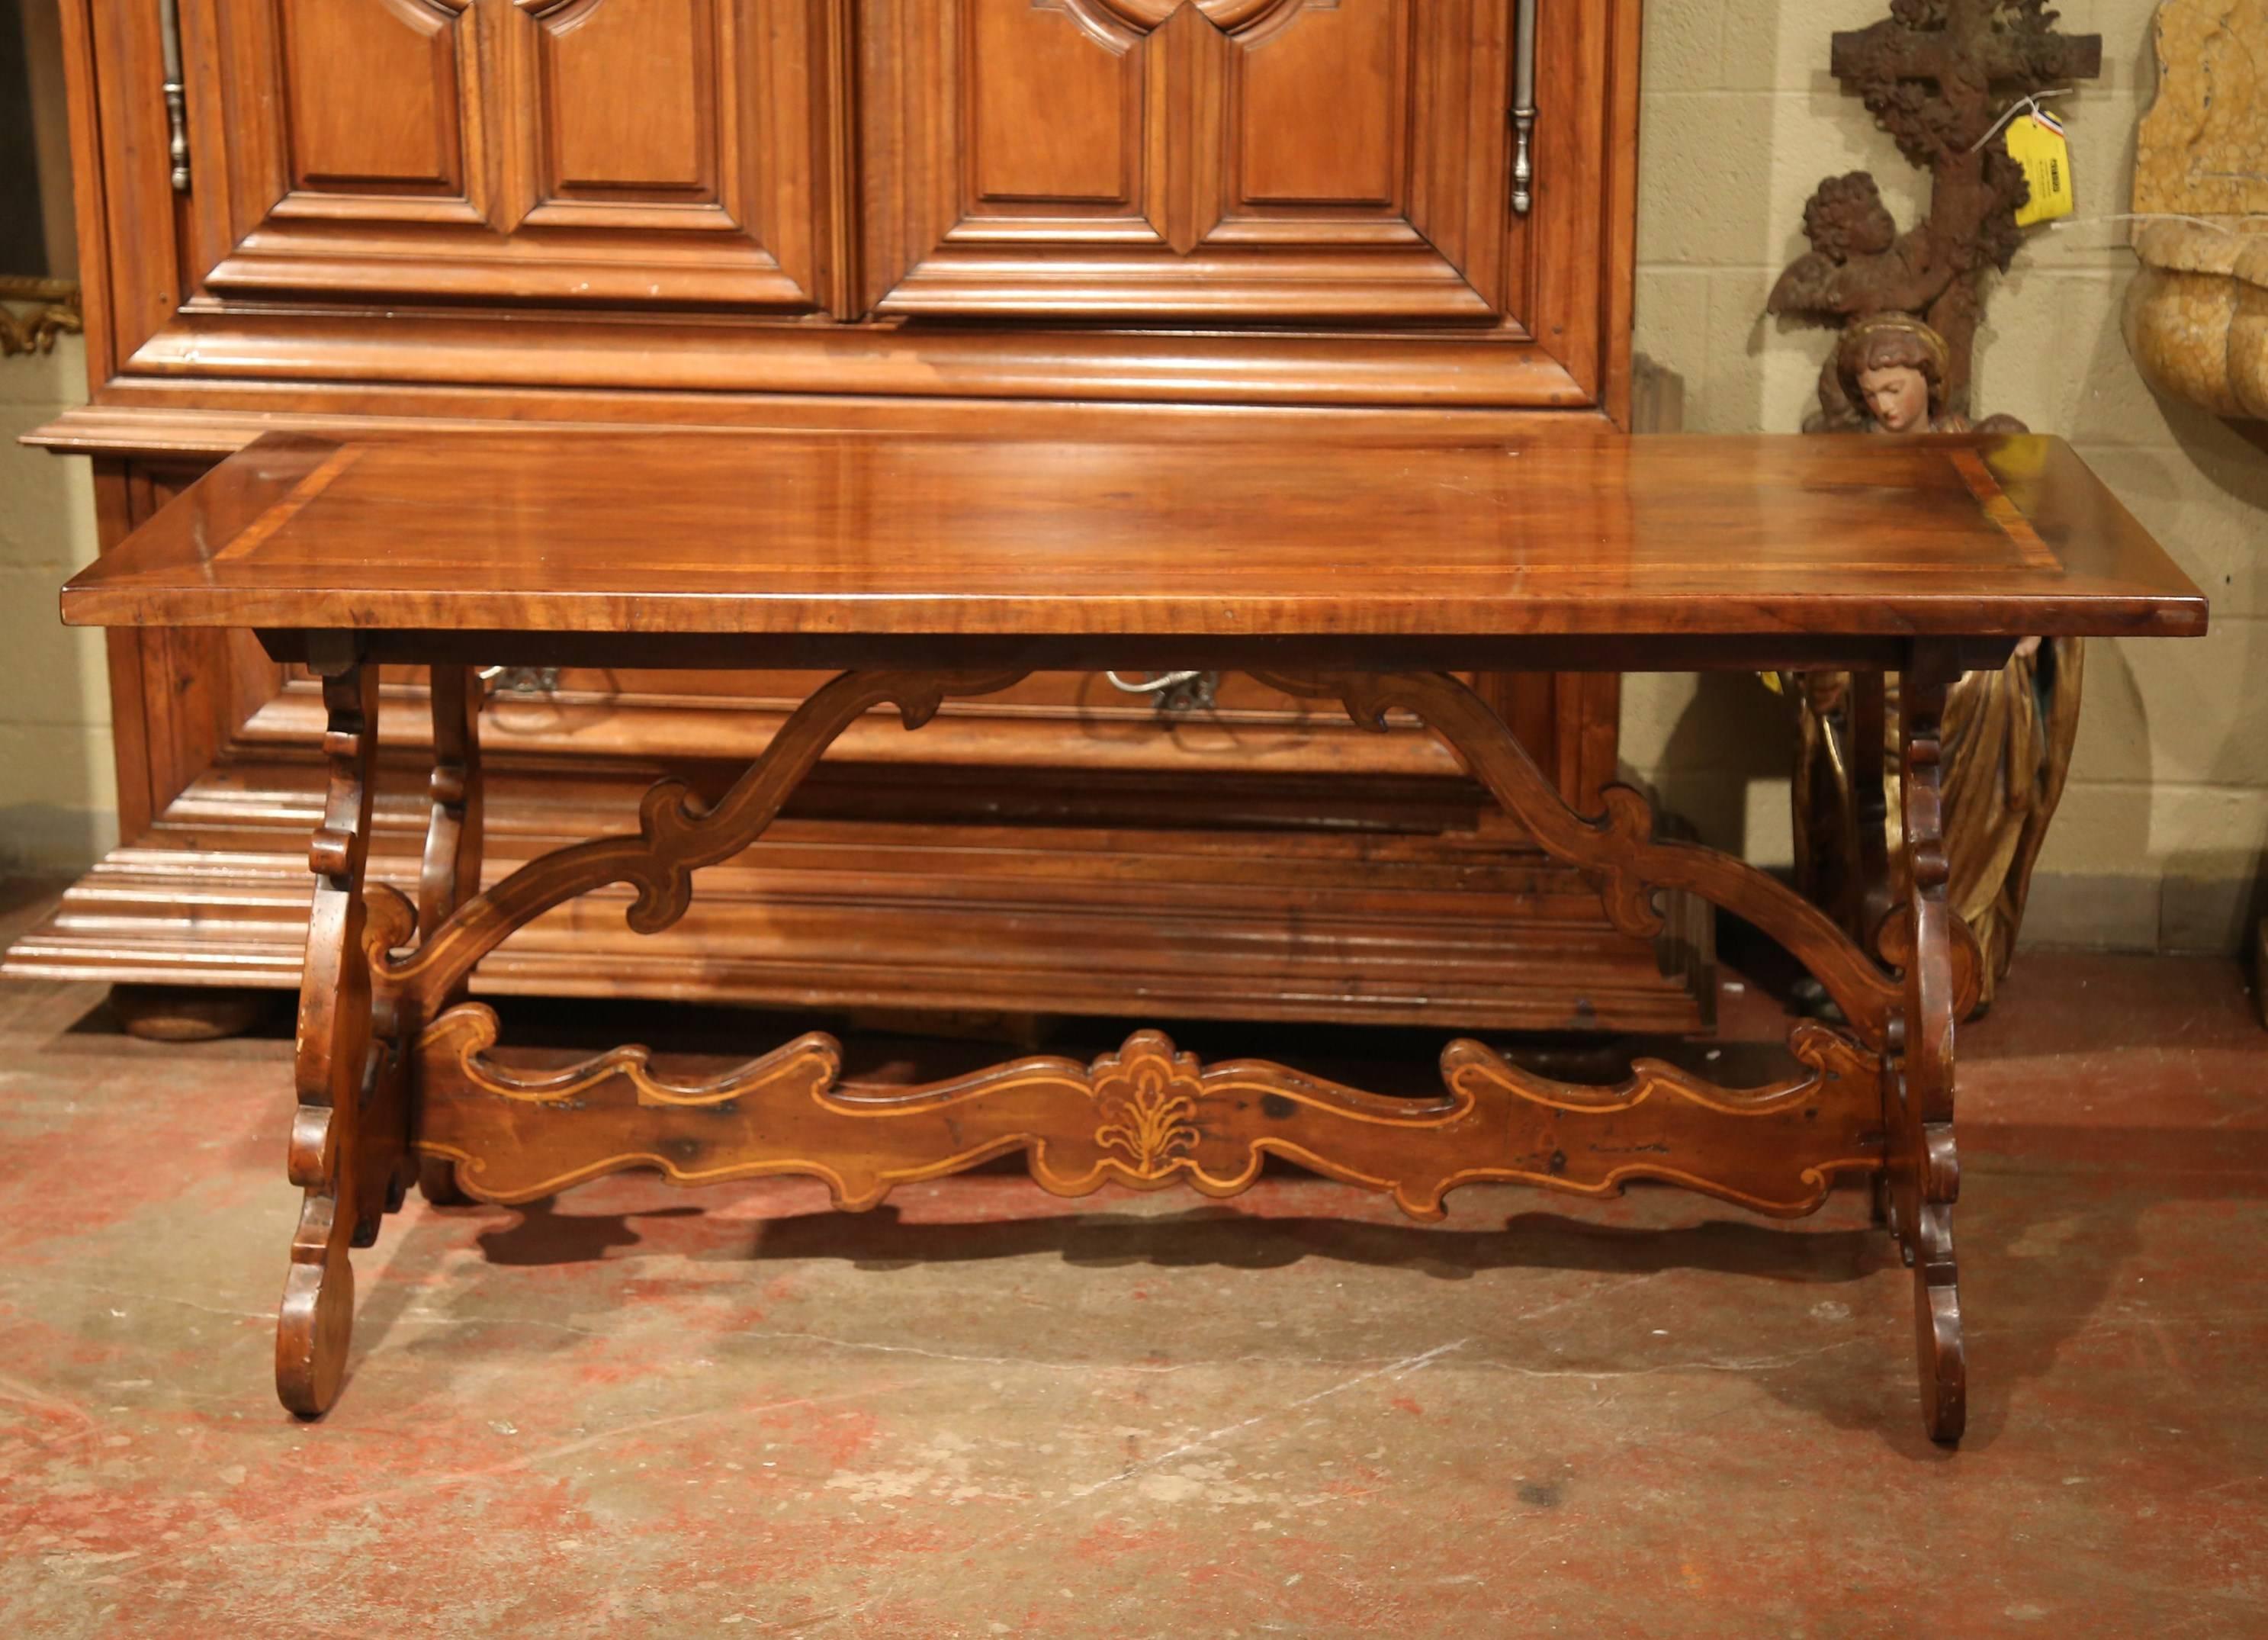 Patinated 19th Century Italian Carved Walnut Trestle Table with Decorative Inlay Motifs